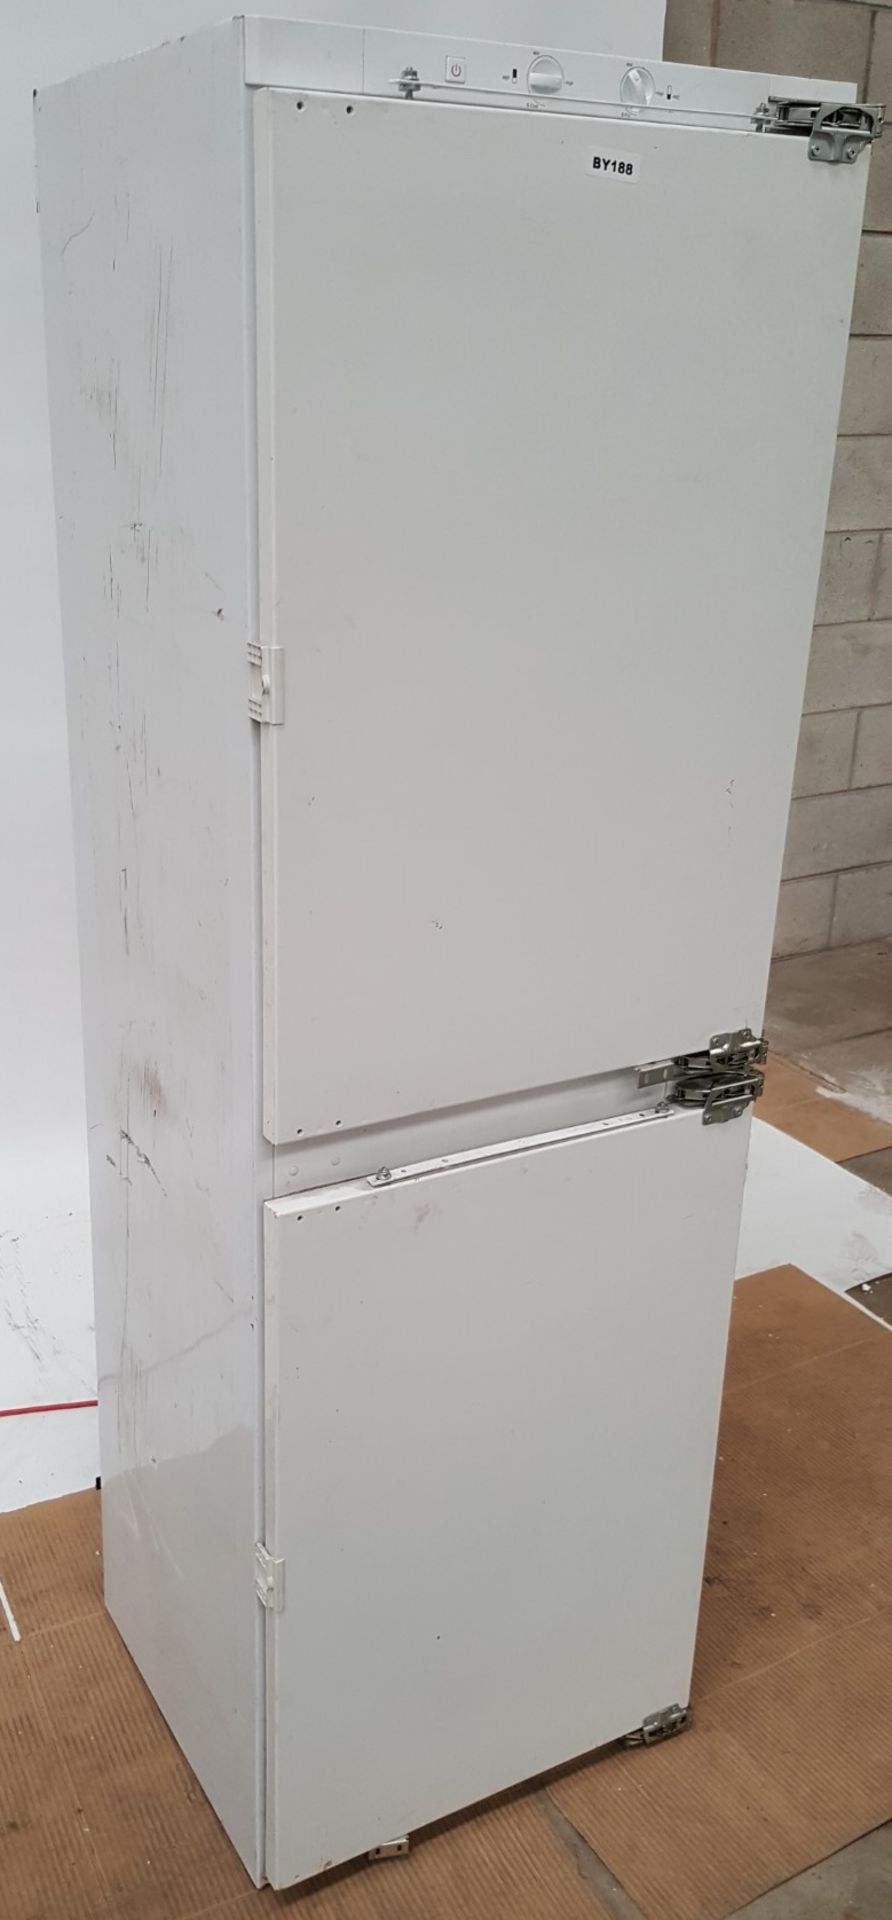 1 x Prima Integrated 50/50 Frost Free Fridge Freezer LPR475A1 - Ref BY188 - Image 8 of 8